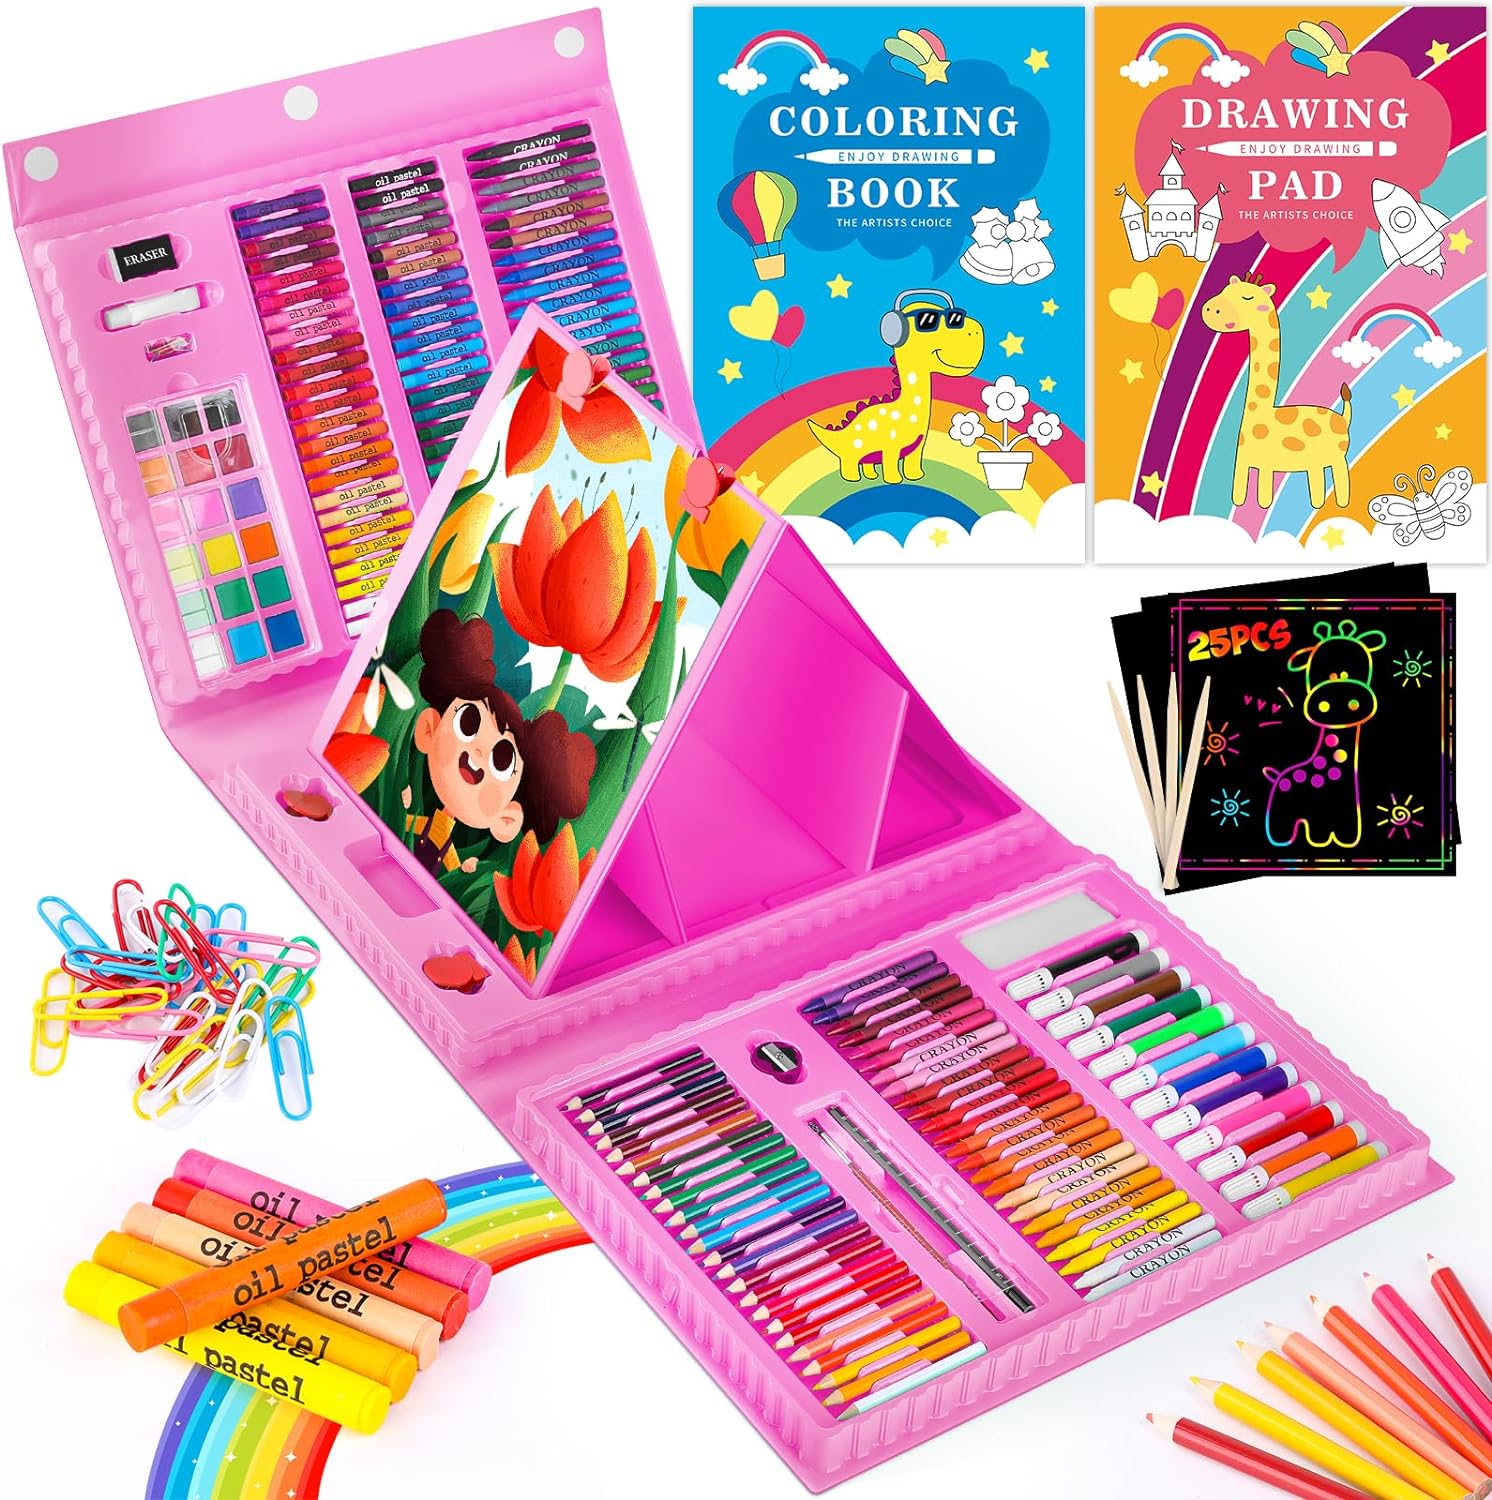 This is the perfect gift for anyone not just kids. We got this for my husband' daughter and of all her gifts it was her favorite. She even got a tablet and she loved this art kit more. It has a built in easel with clips and it works great. I woulda definitely recommend this to anyone who has kids or even adults who maybe travel and enjoy art. It' not a professional art kit but it' perfect for beginners or anyone who just enjoys their artsy side. I can't say enough positive things about this p